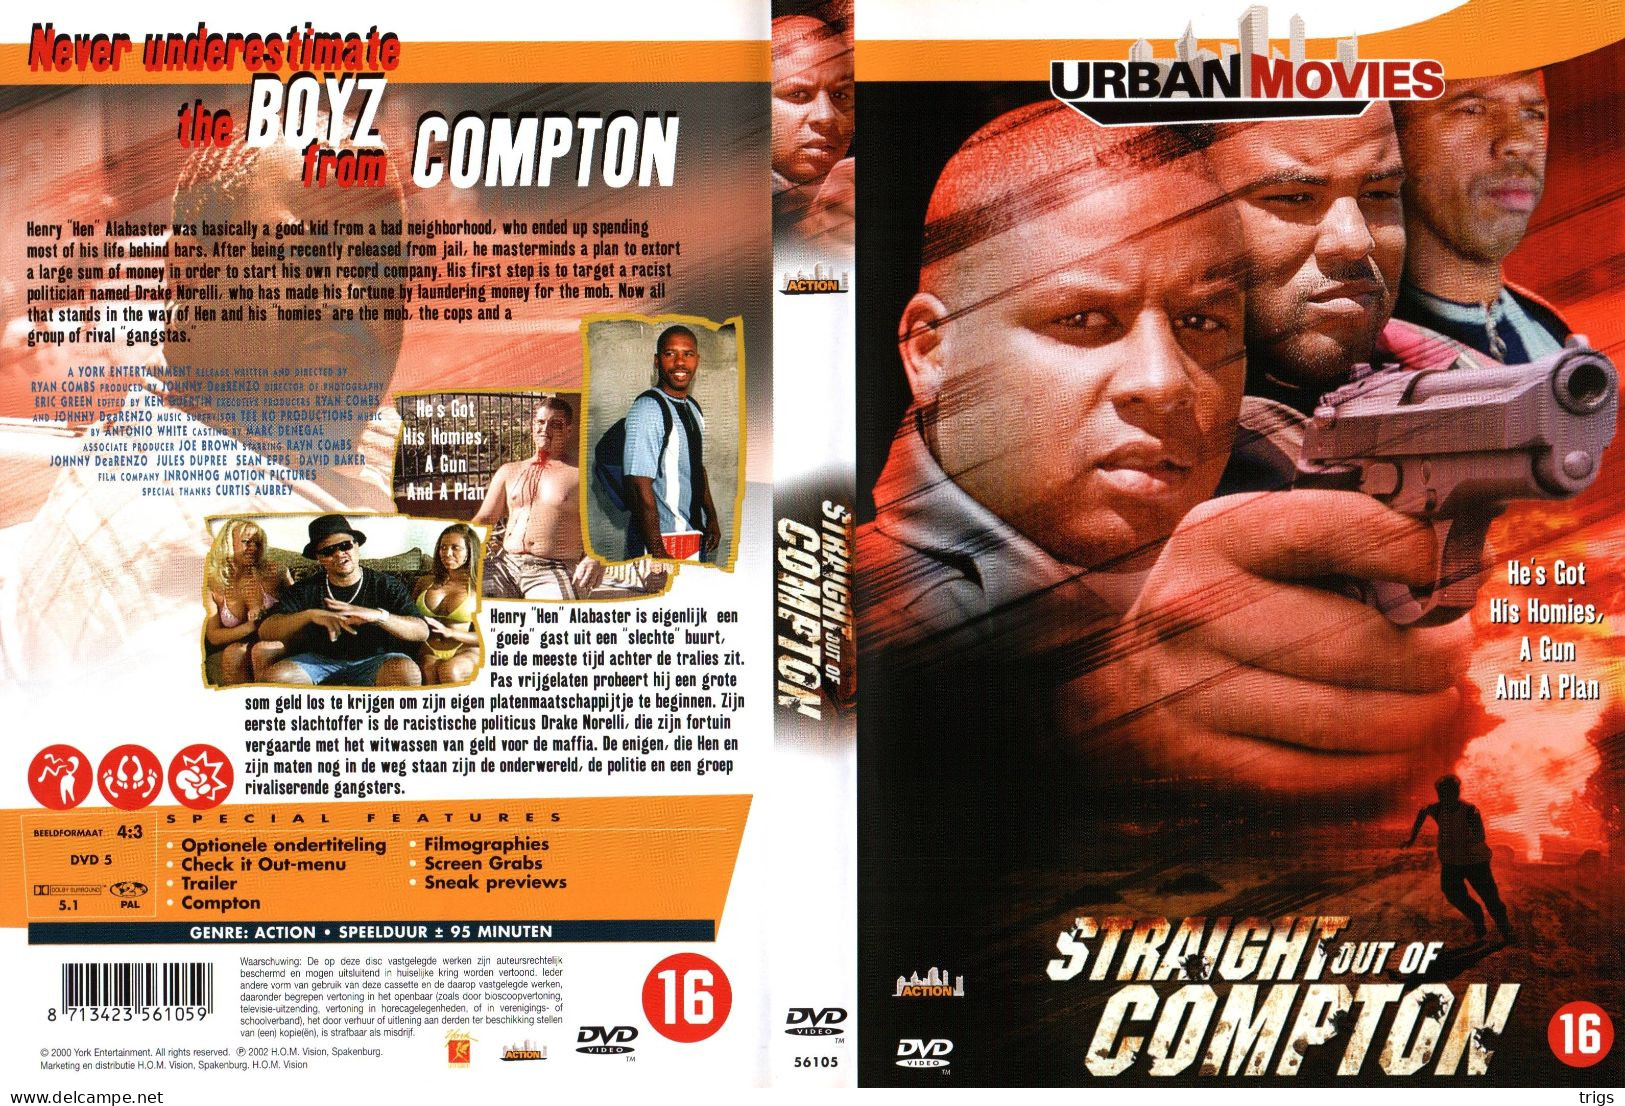 DVD - Straight Out Of Compton - Krimis & Thriller